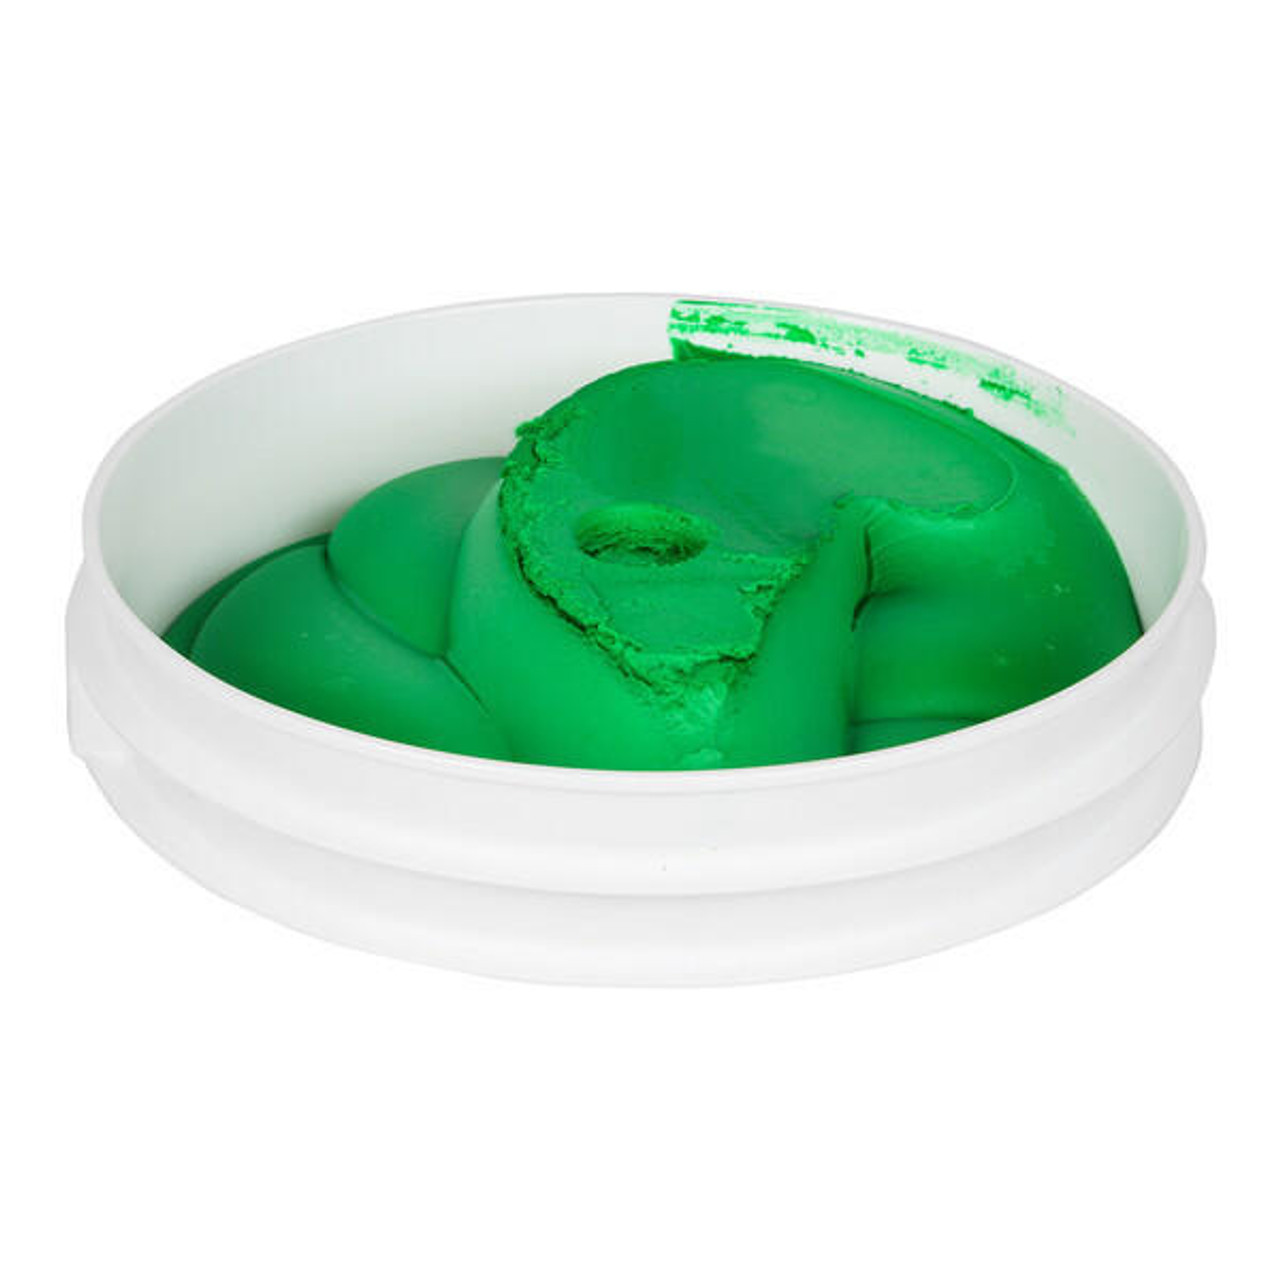  Rich's Green Buttrcreme Icing - 15 lb. Pail Elegance in Luscious Green 